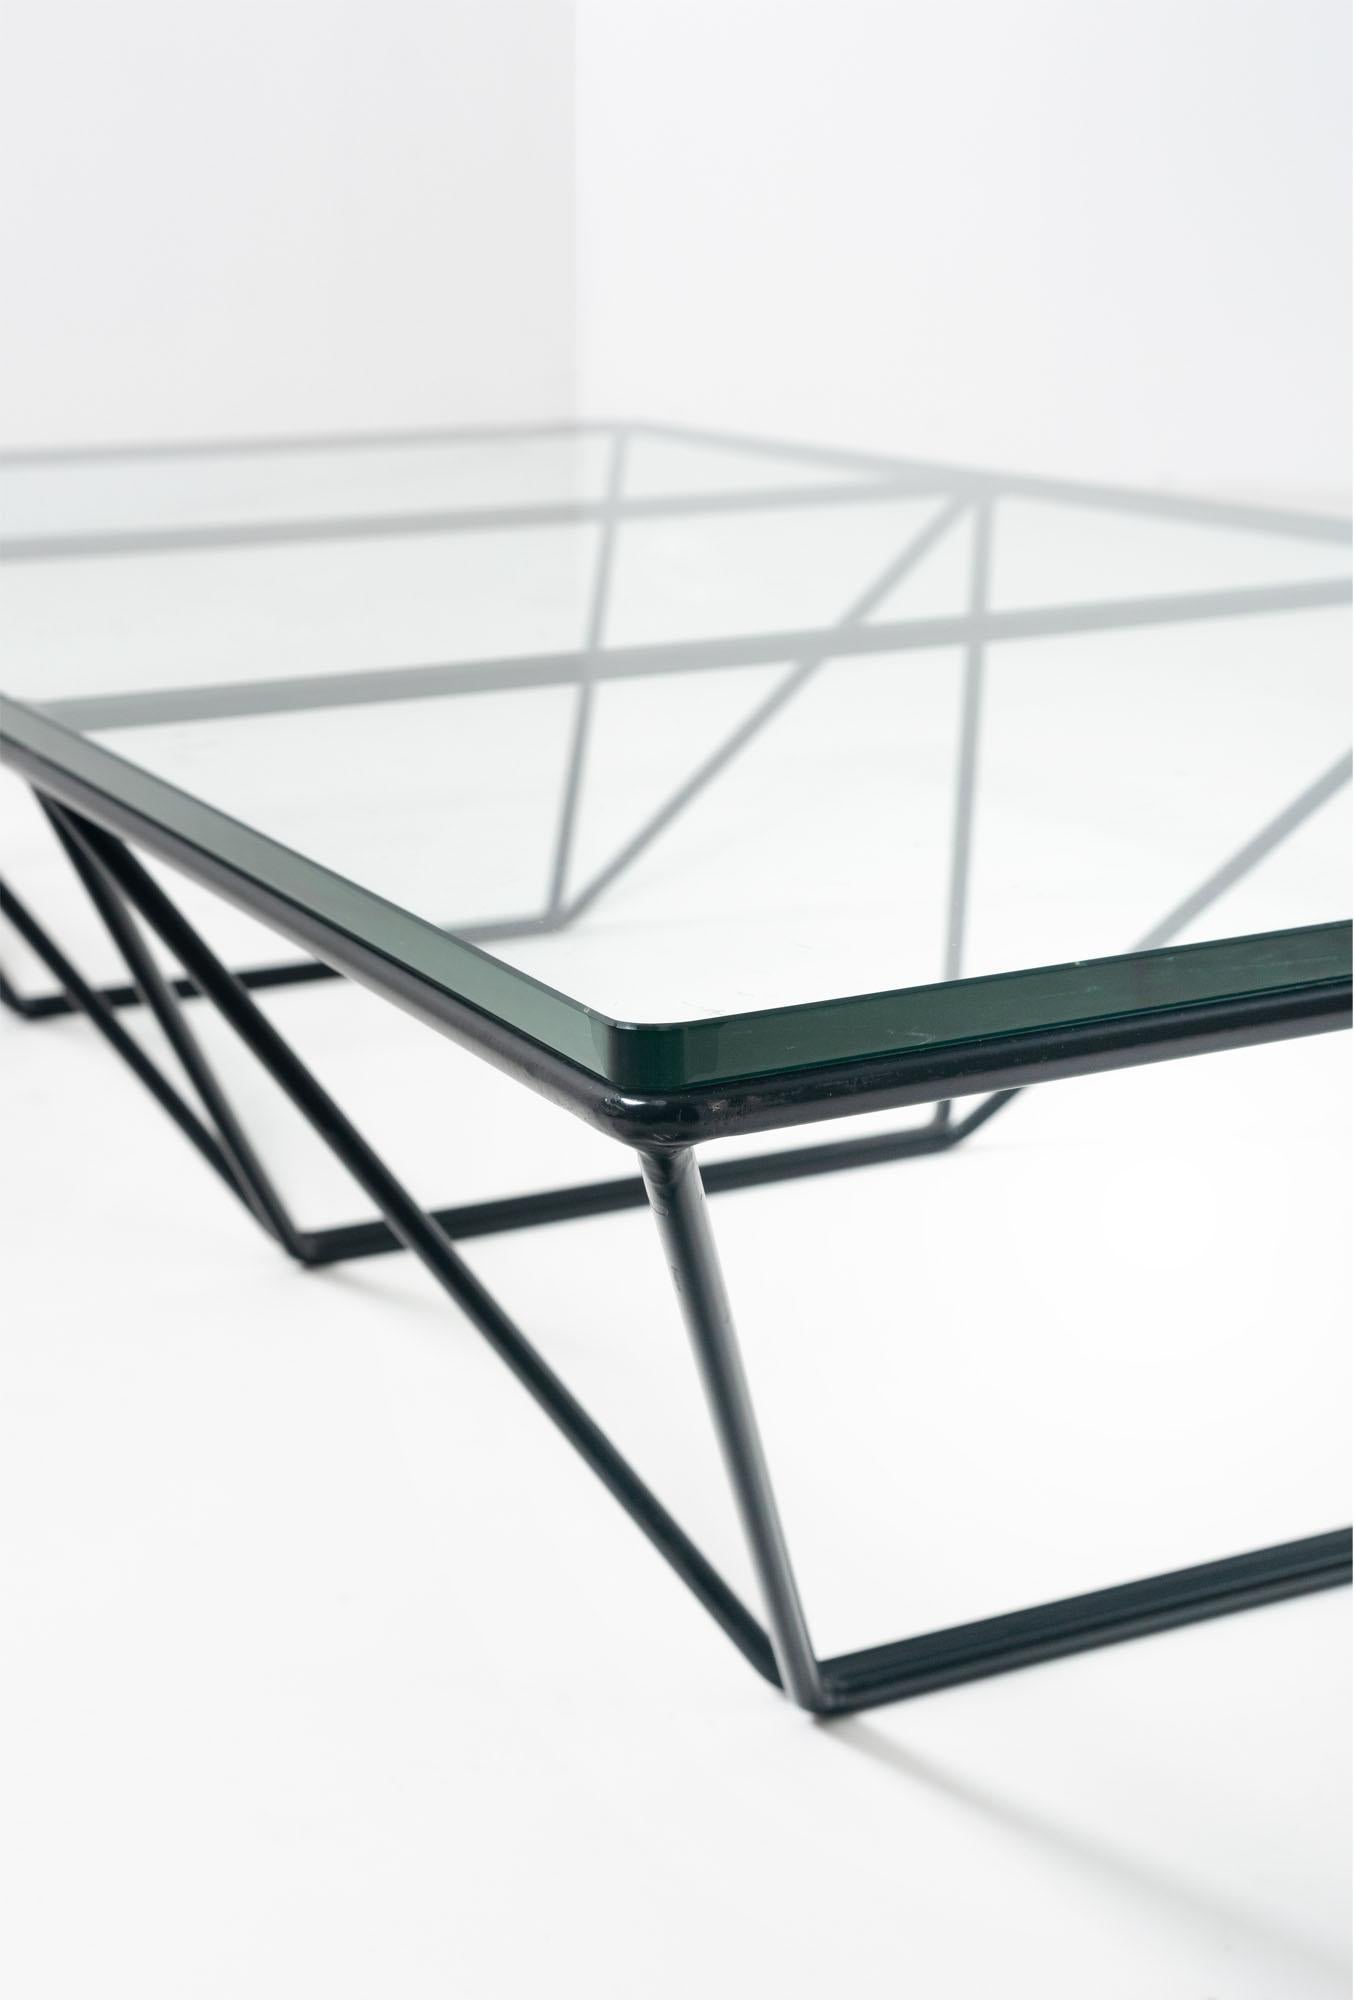 Chamfered Alanda Coffee Table by Paolo Piva for B&B Italia, 1980s